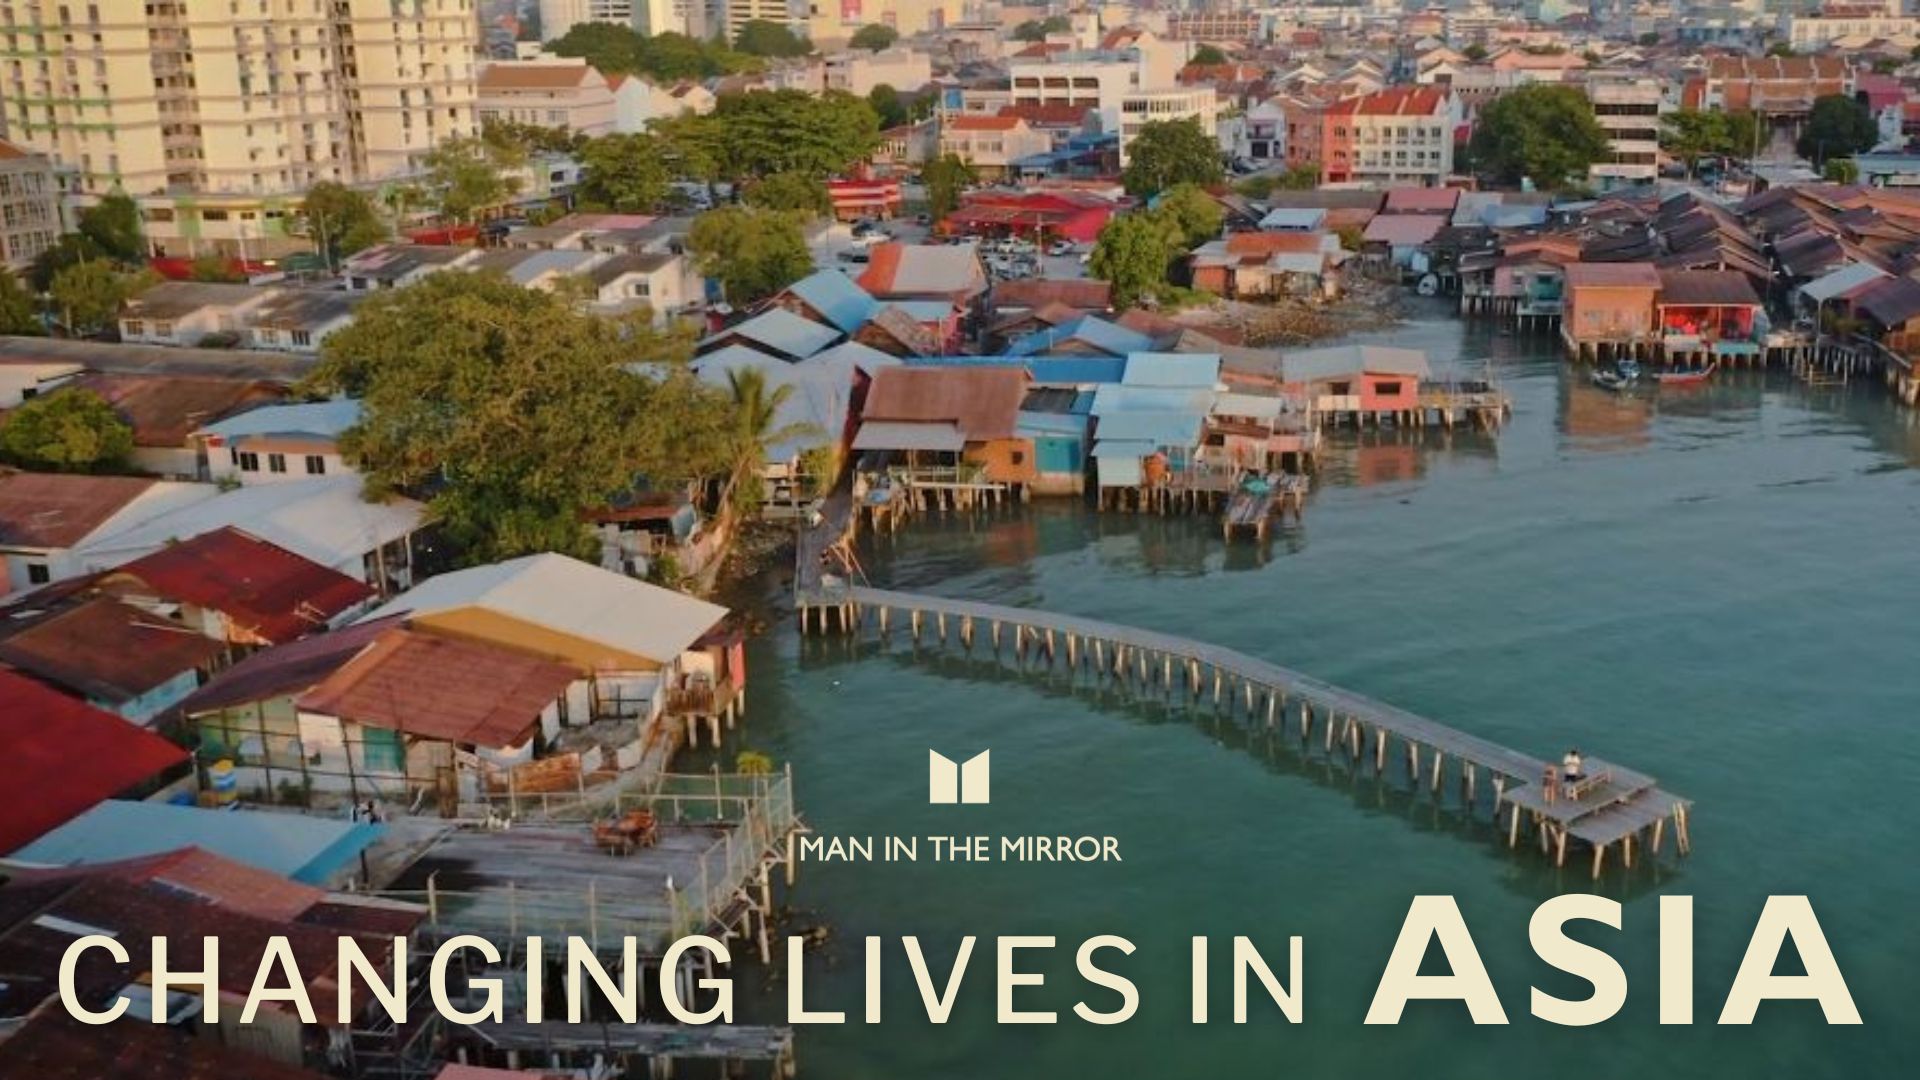 How God is changing lives in Asia